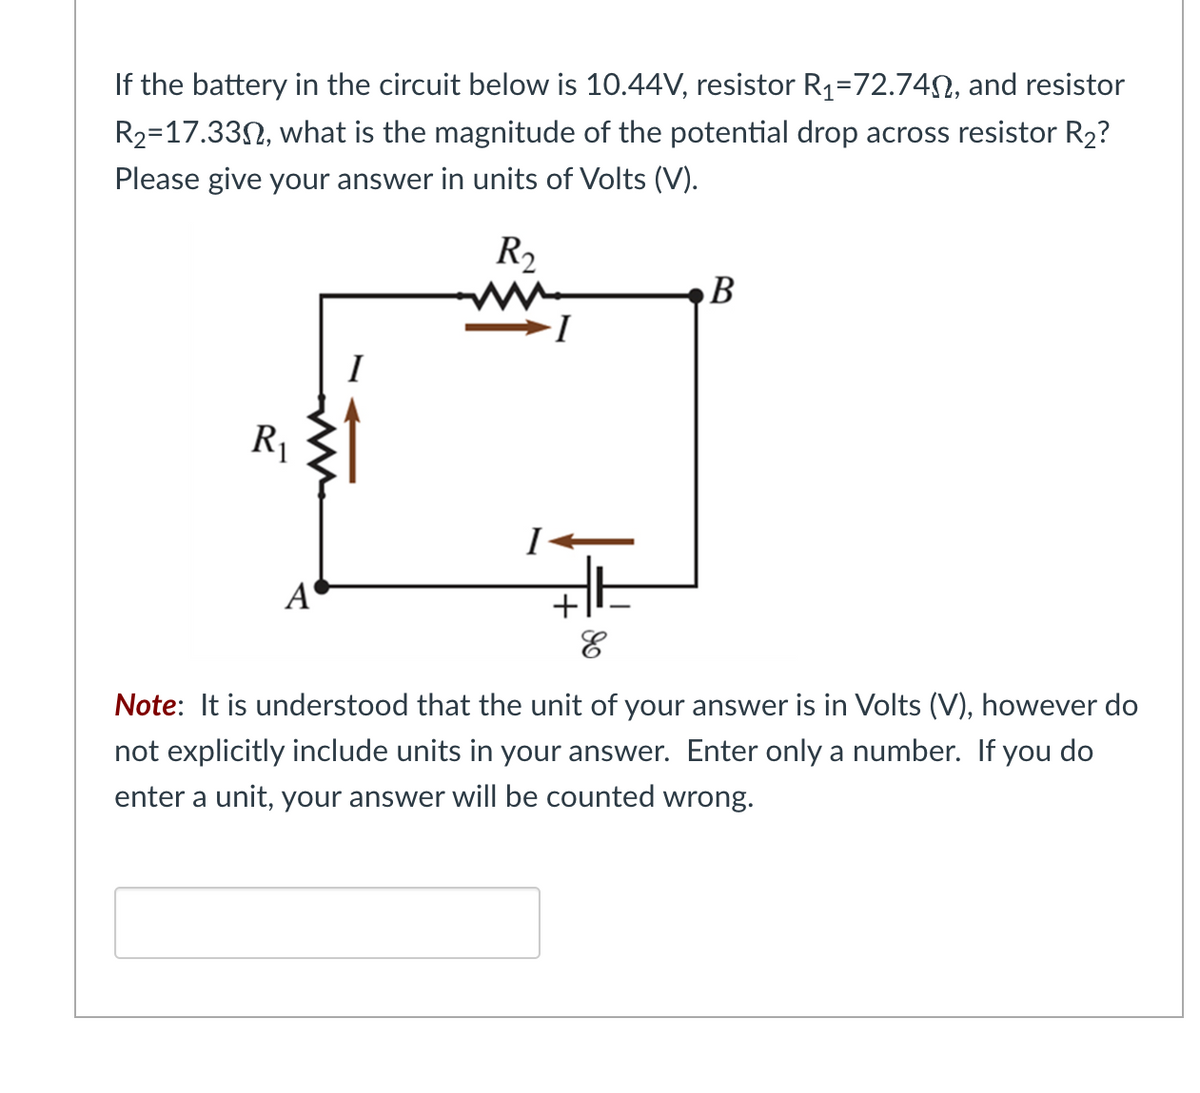 If the battery in the circuit below is 10.44V, resistor R₁=72.74, and resistor
R₂-17.330, what is the magnitude of the potential drop across resistor R₂?
Please give your answer in units of Volts (V).
R₂
R₁
A
I
B
E
Note: It is understood that the unit of your answer is in Volts (V), however do
not explicitly include units in your answer. Enter only a number. If you do
enter a unit, your answer will be counted wrong.